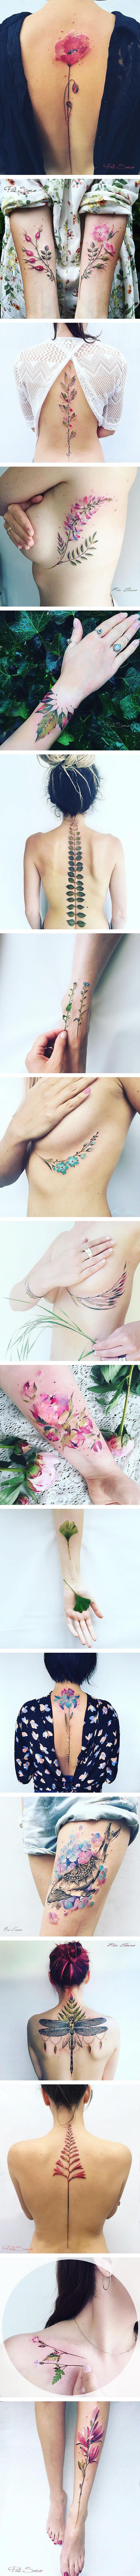 Tattoo Artist Creates Delicate Tattoos That Are Inspired By Nature (By Pis Saro)...